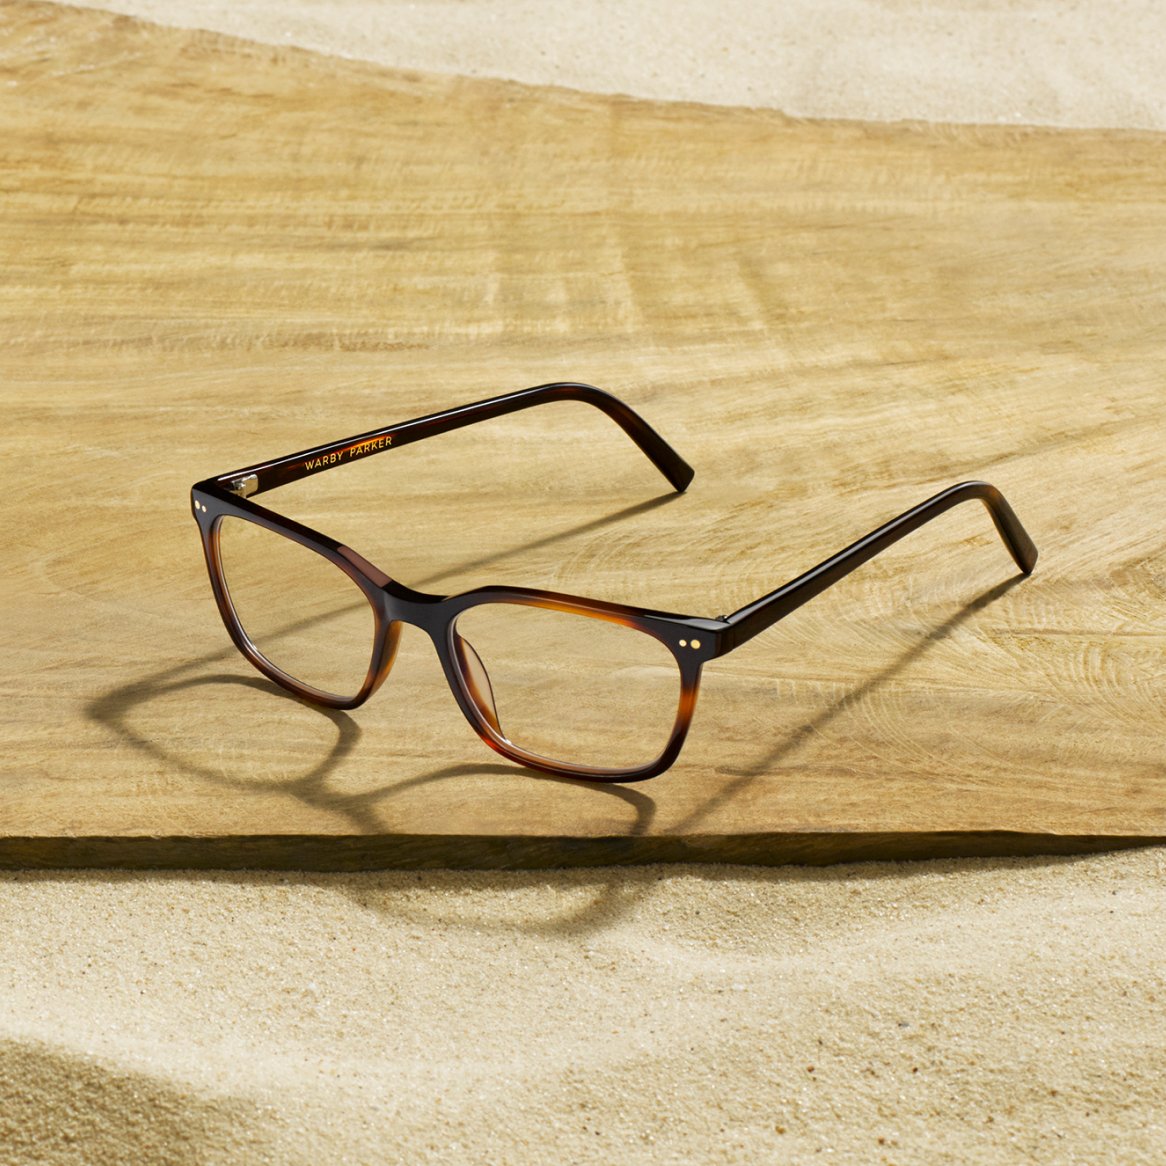 Close-up image of a pair of eyeglasses